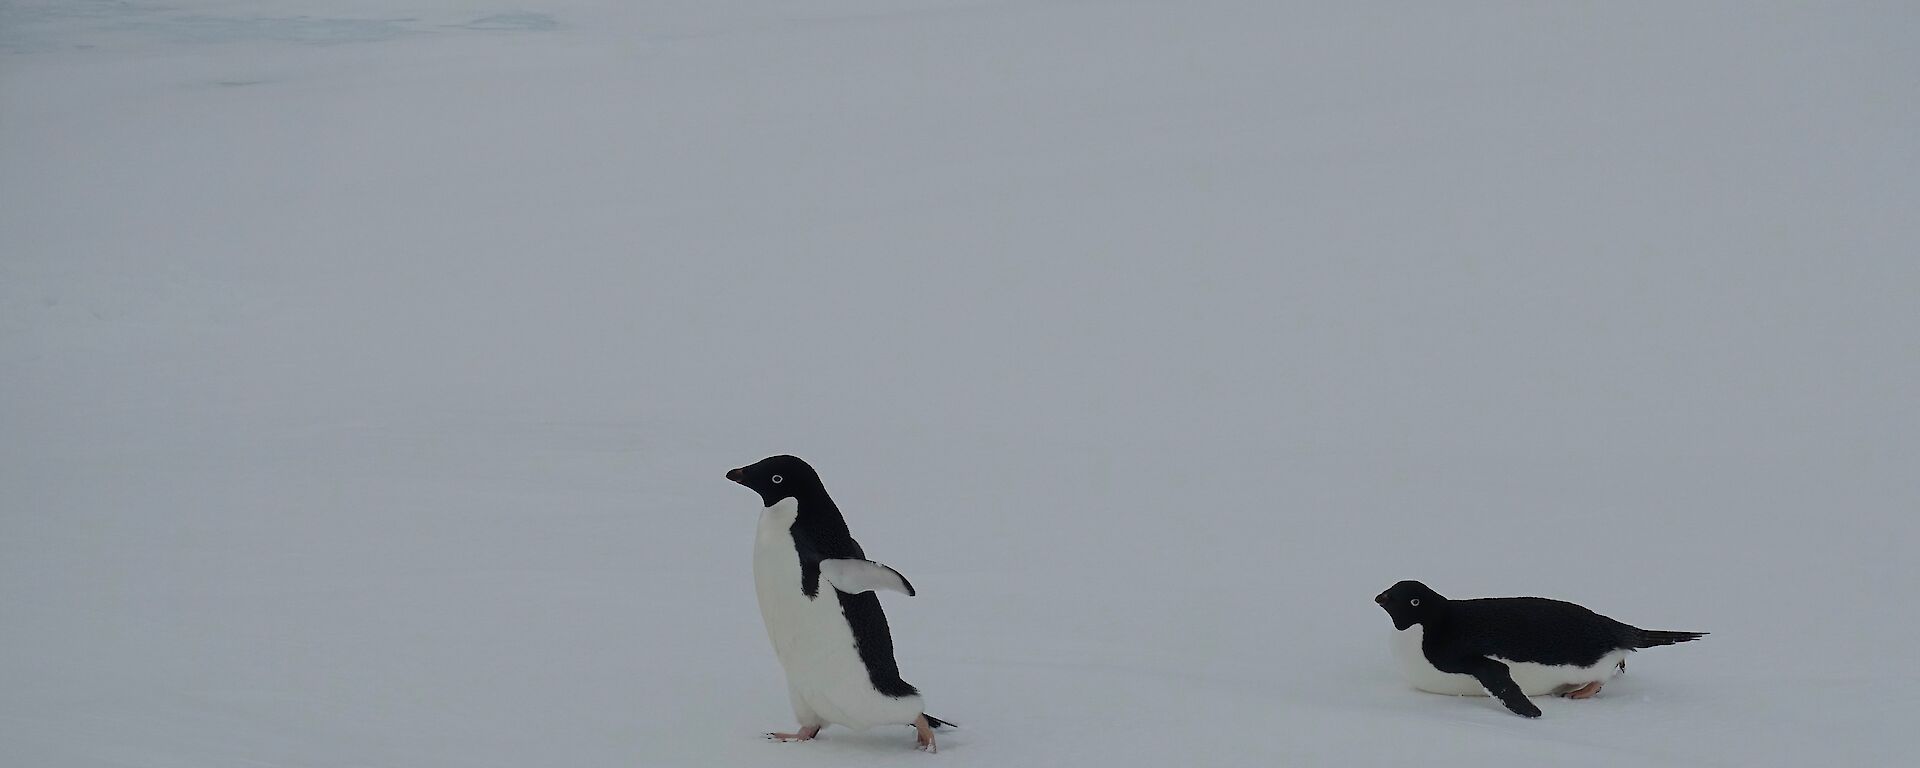 Against a grey ice background, one Adélie penguin walks across the frame while another belly-slides across behind it